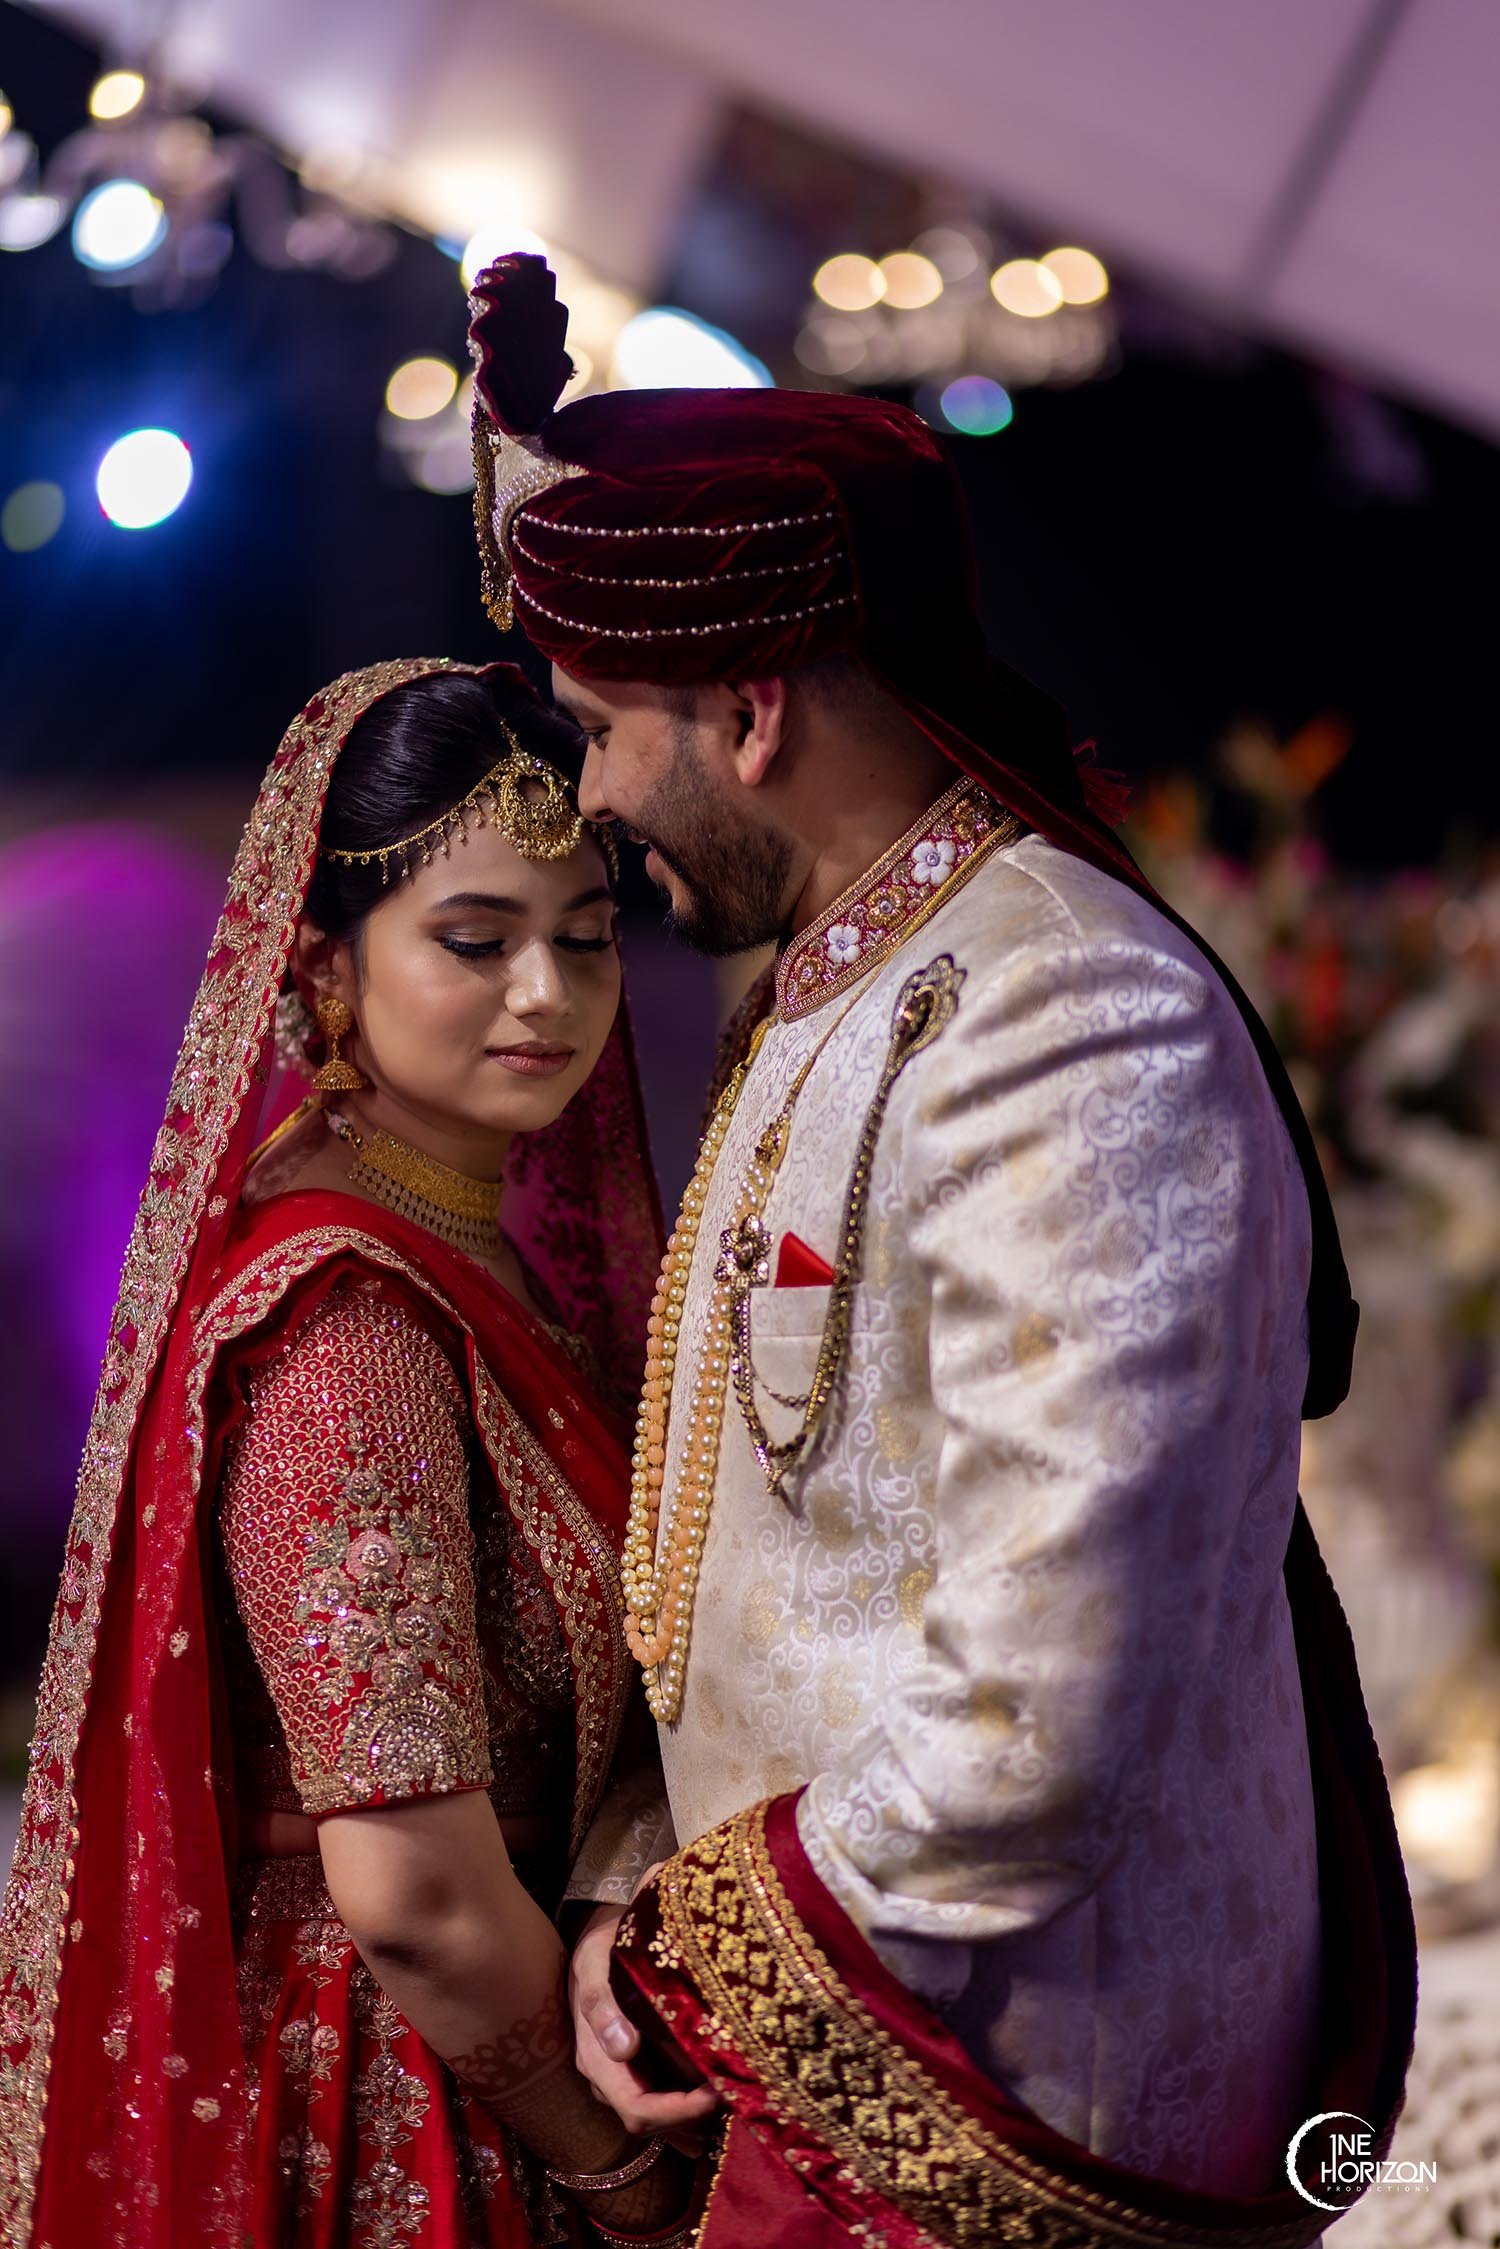 72 Indian Muslim Wedding Couple Stock Video Footage - 4K and HD Video Clips  | Shutterstock